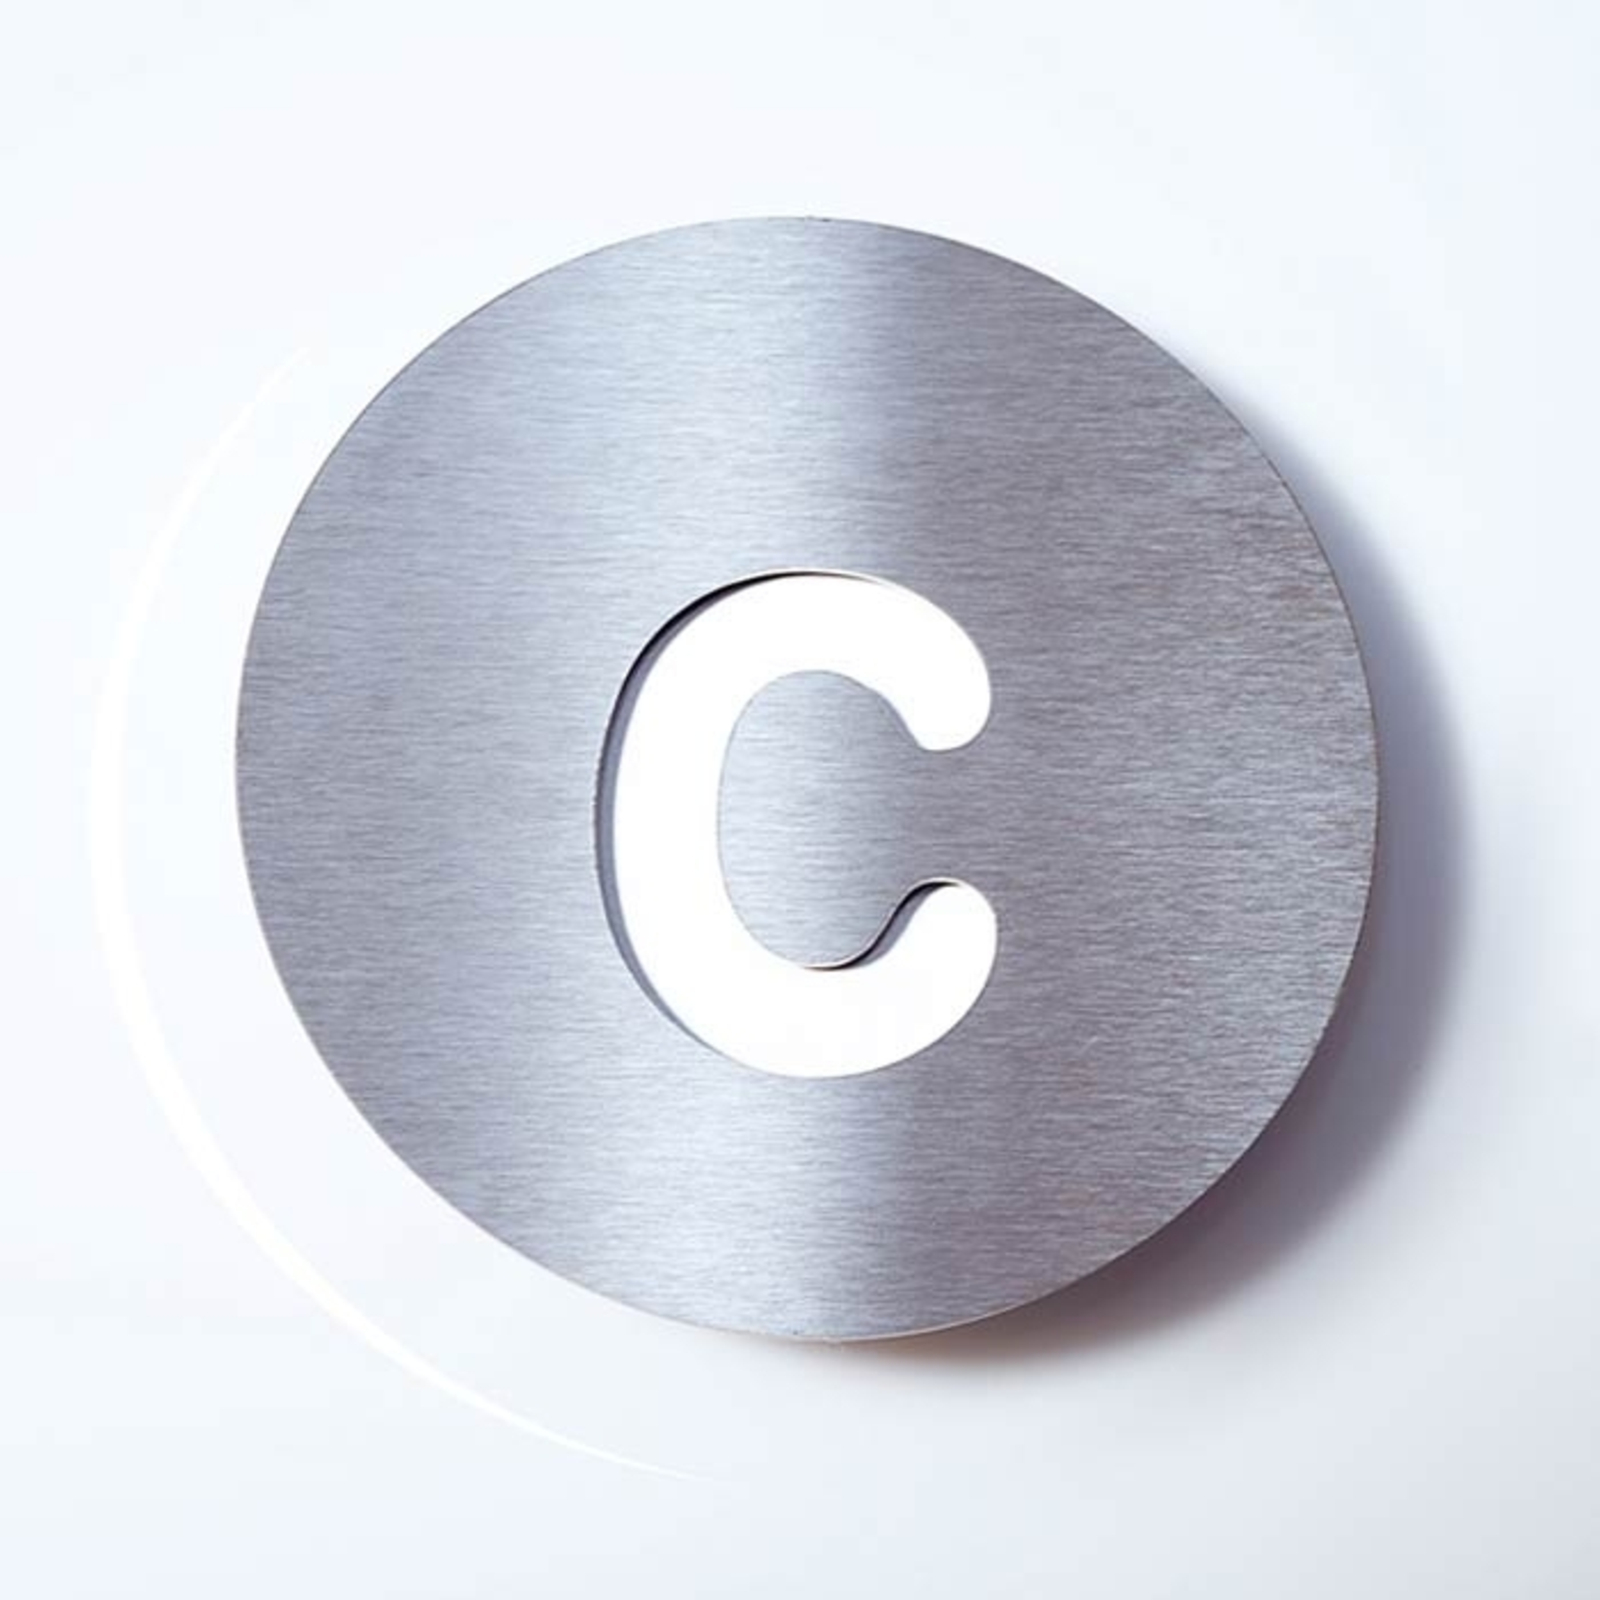 Round stainless steel house number - c